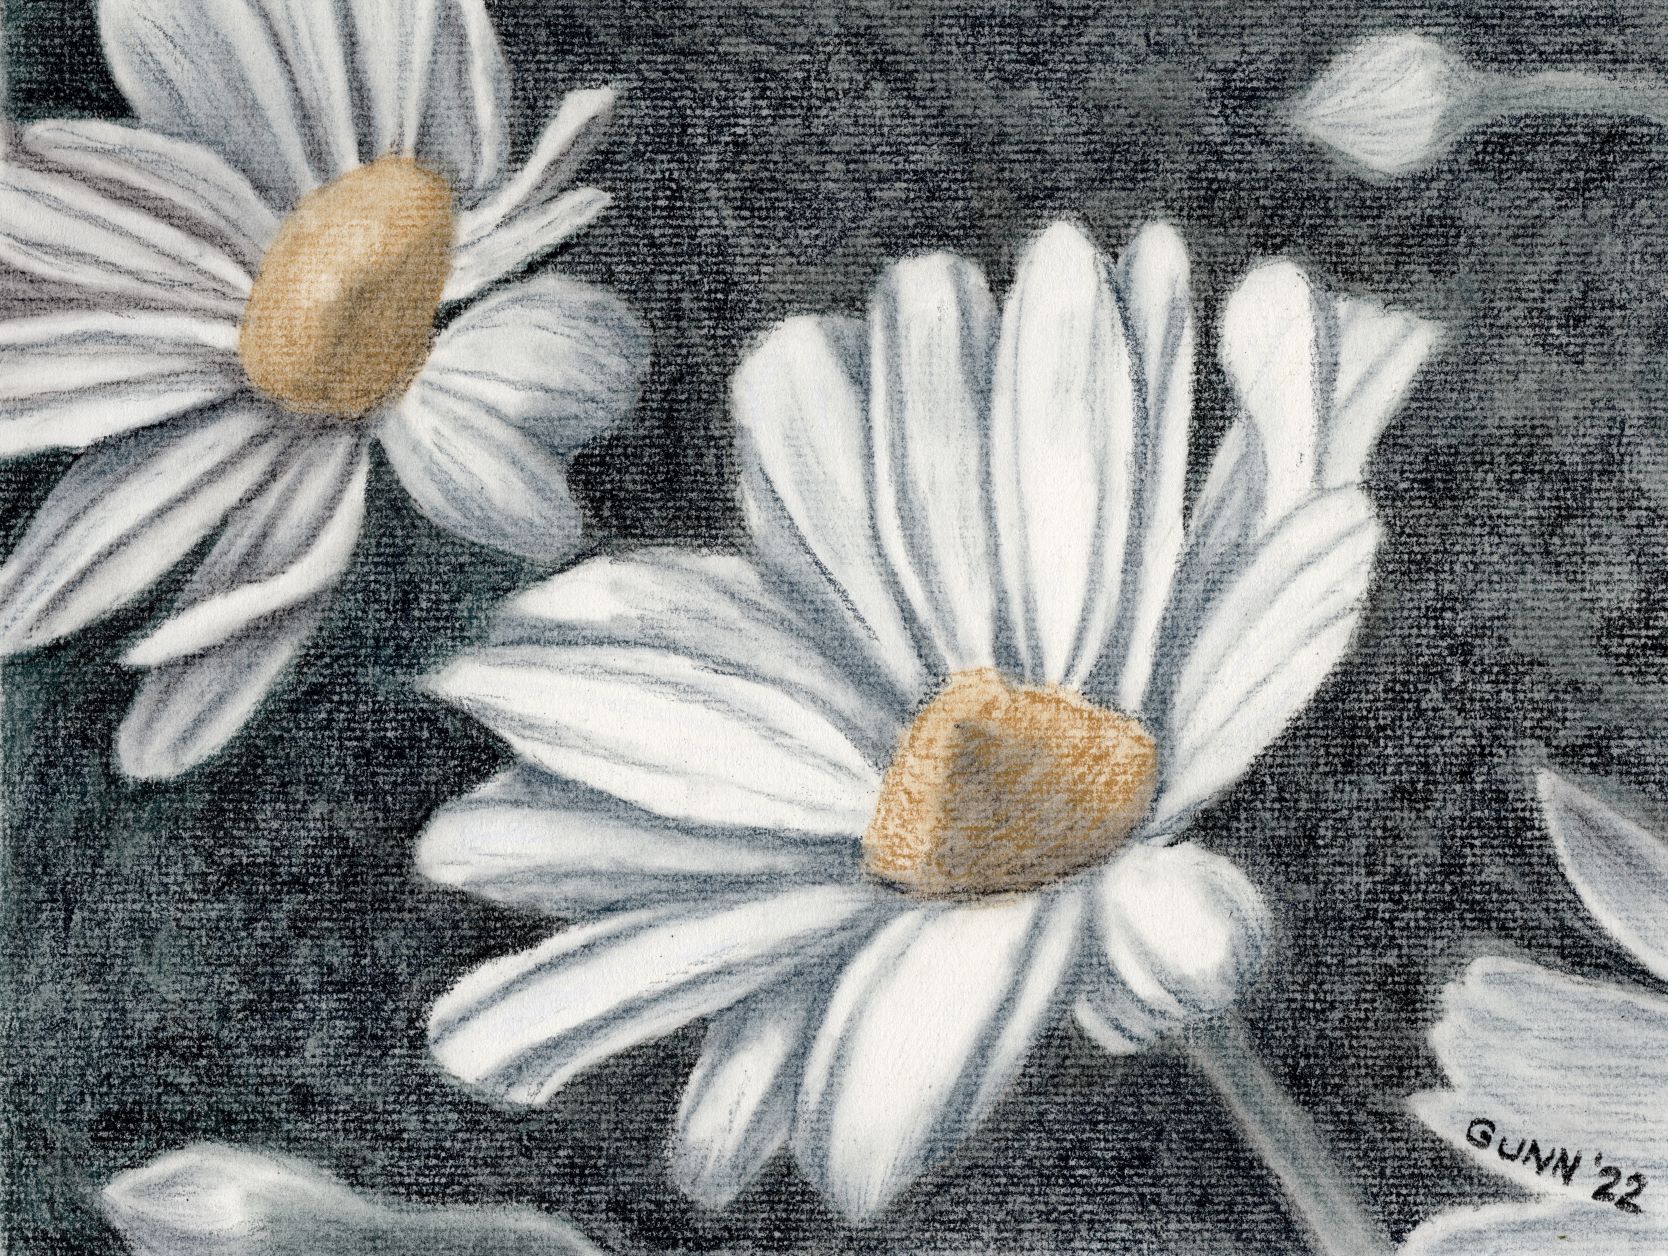 first version of Daisies, tinted charcoal on paper